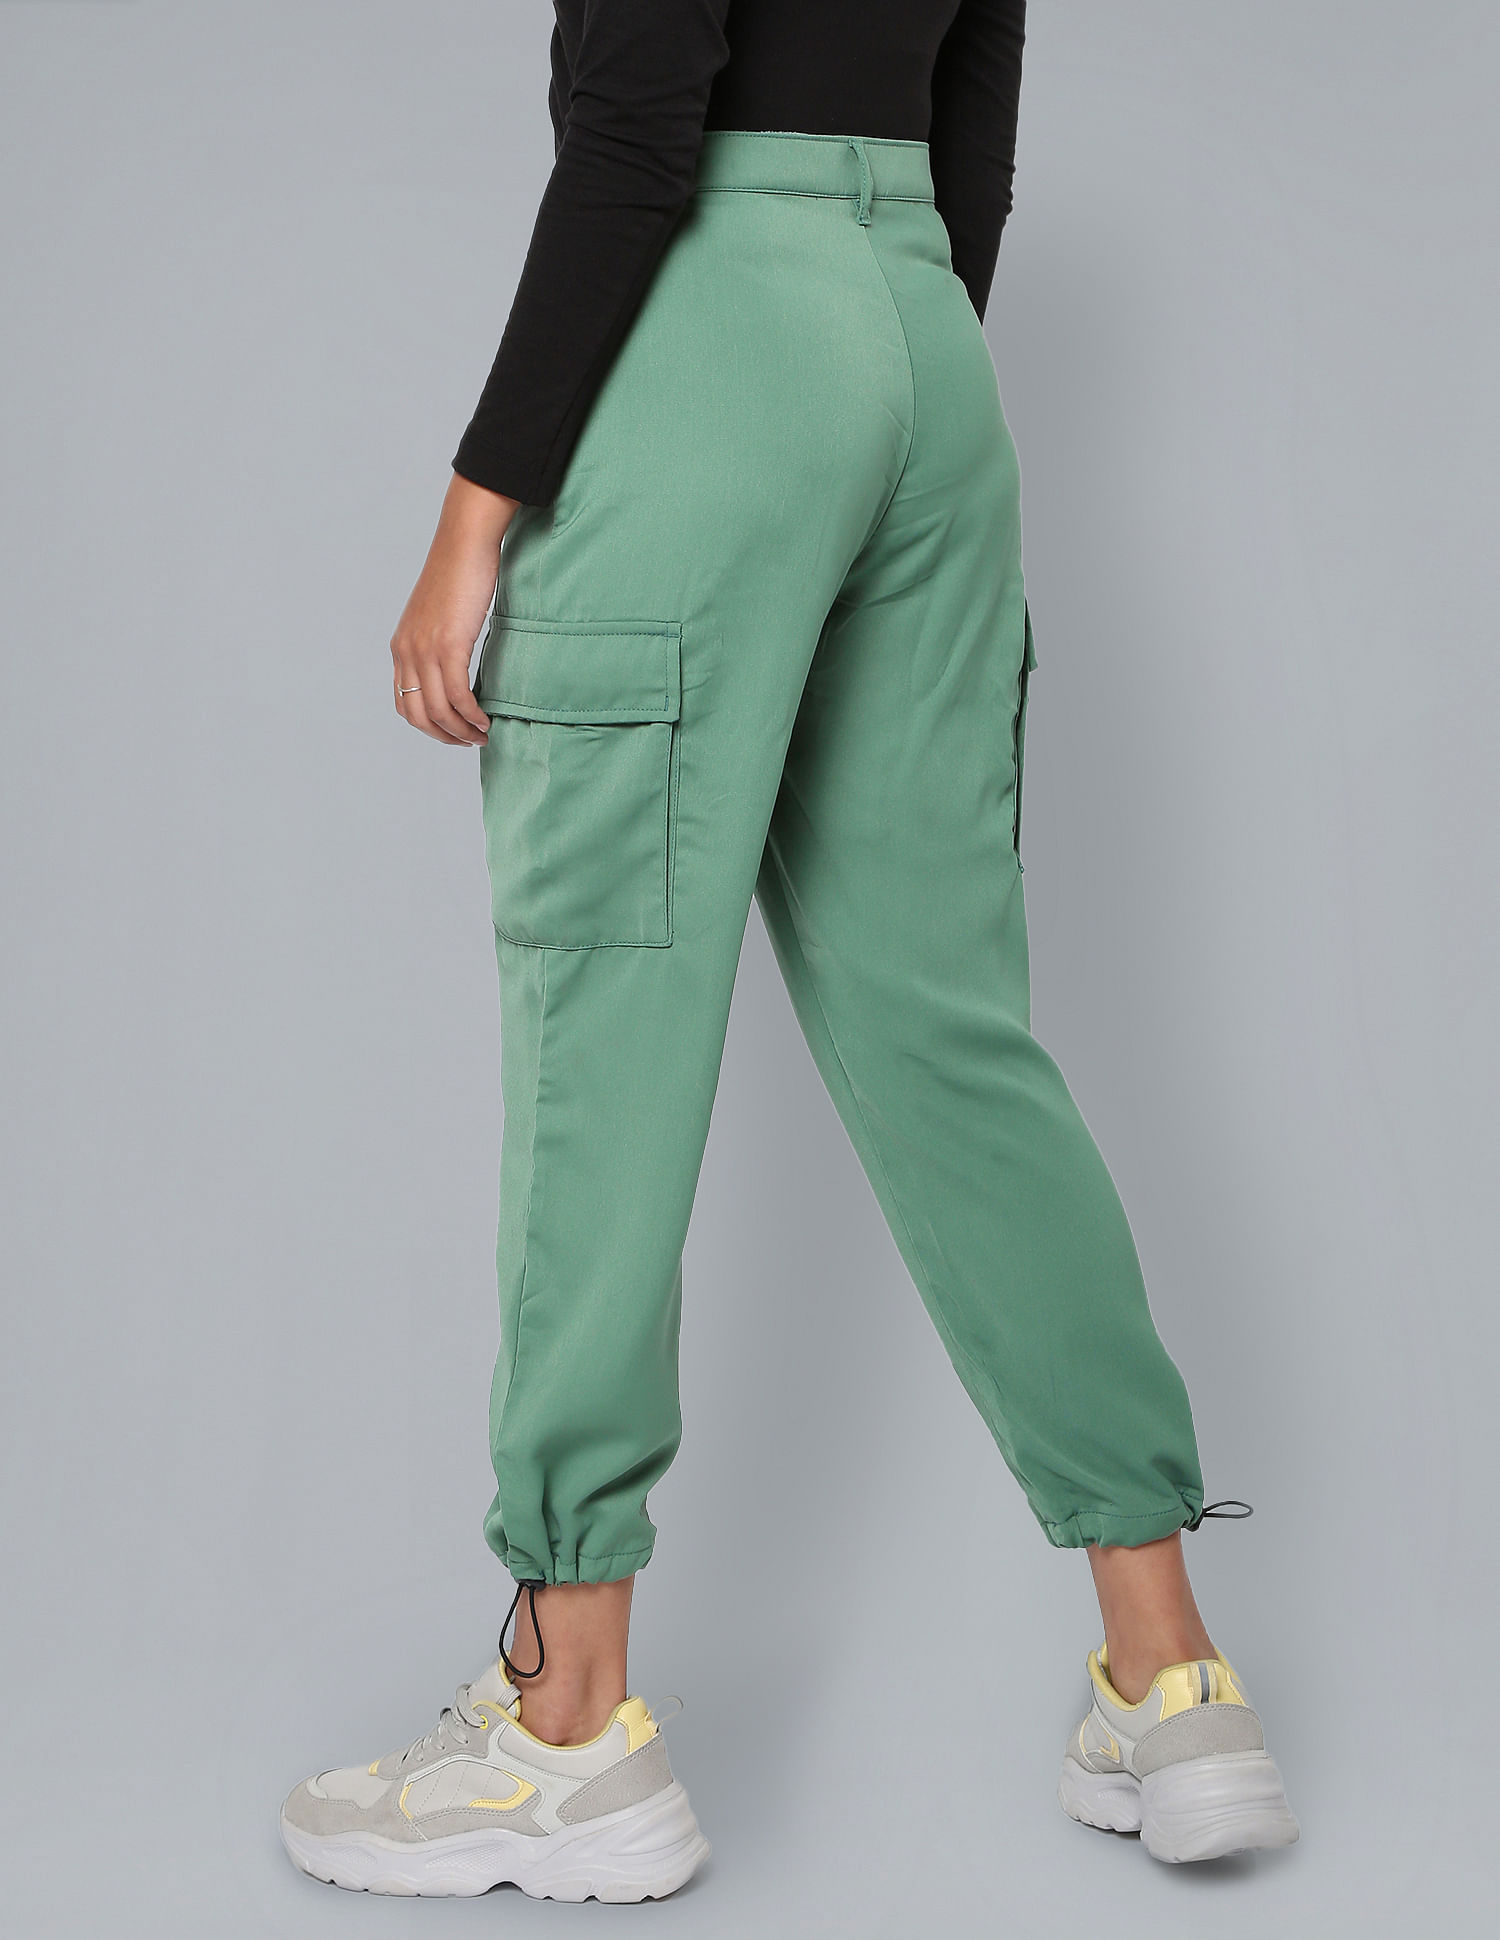 Ladies Plain Trouser Suppliers 19165066 - Wholesale Manufacturers and  Exporters